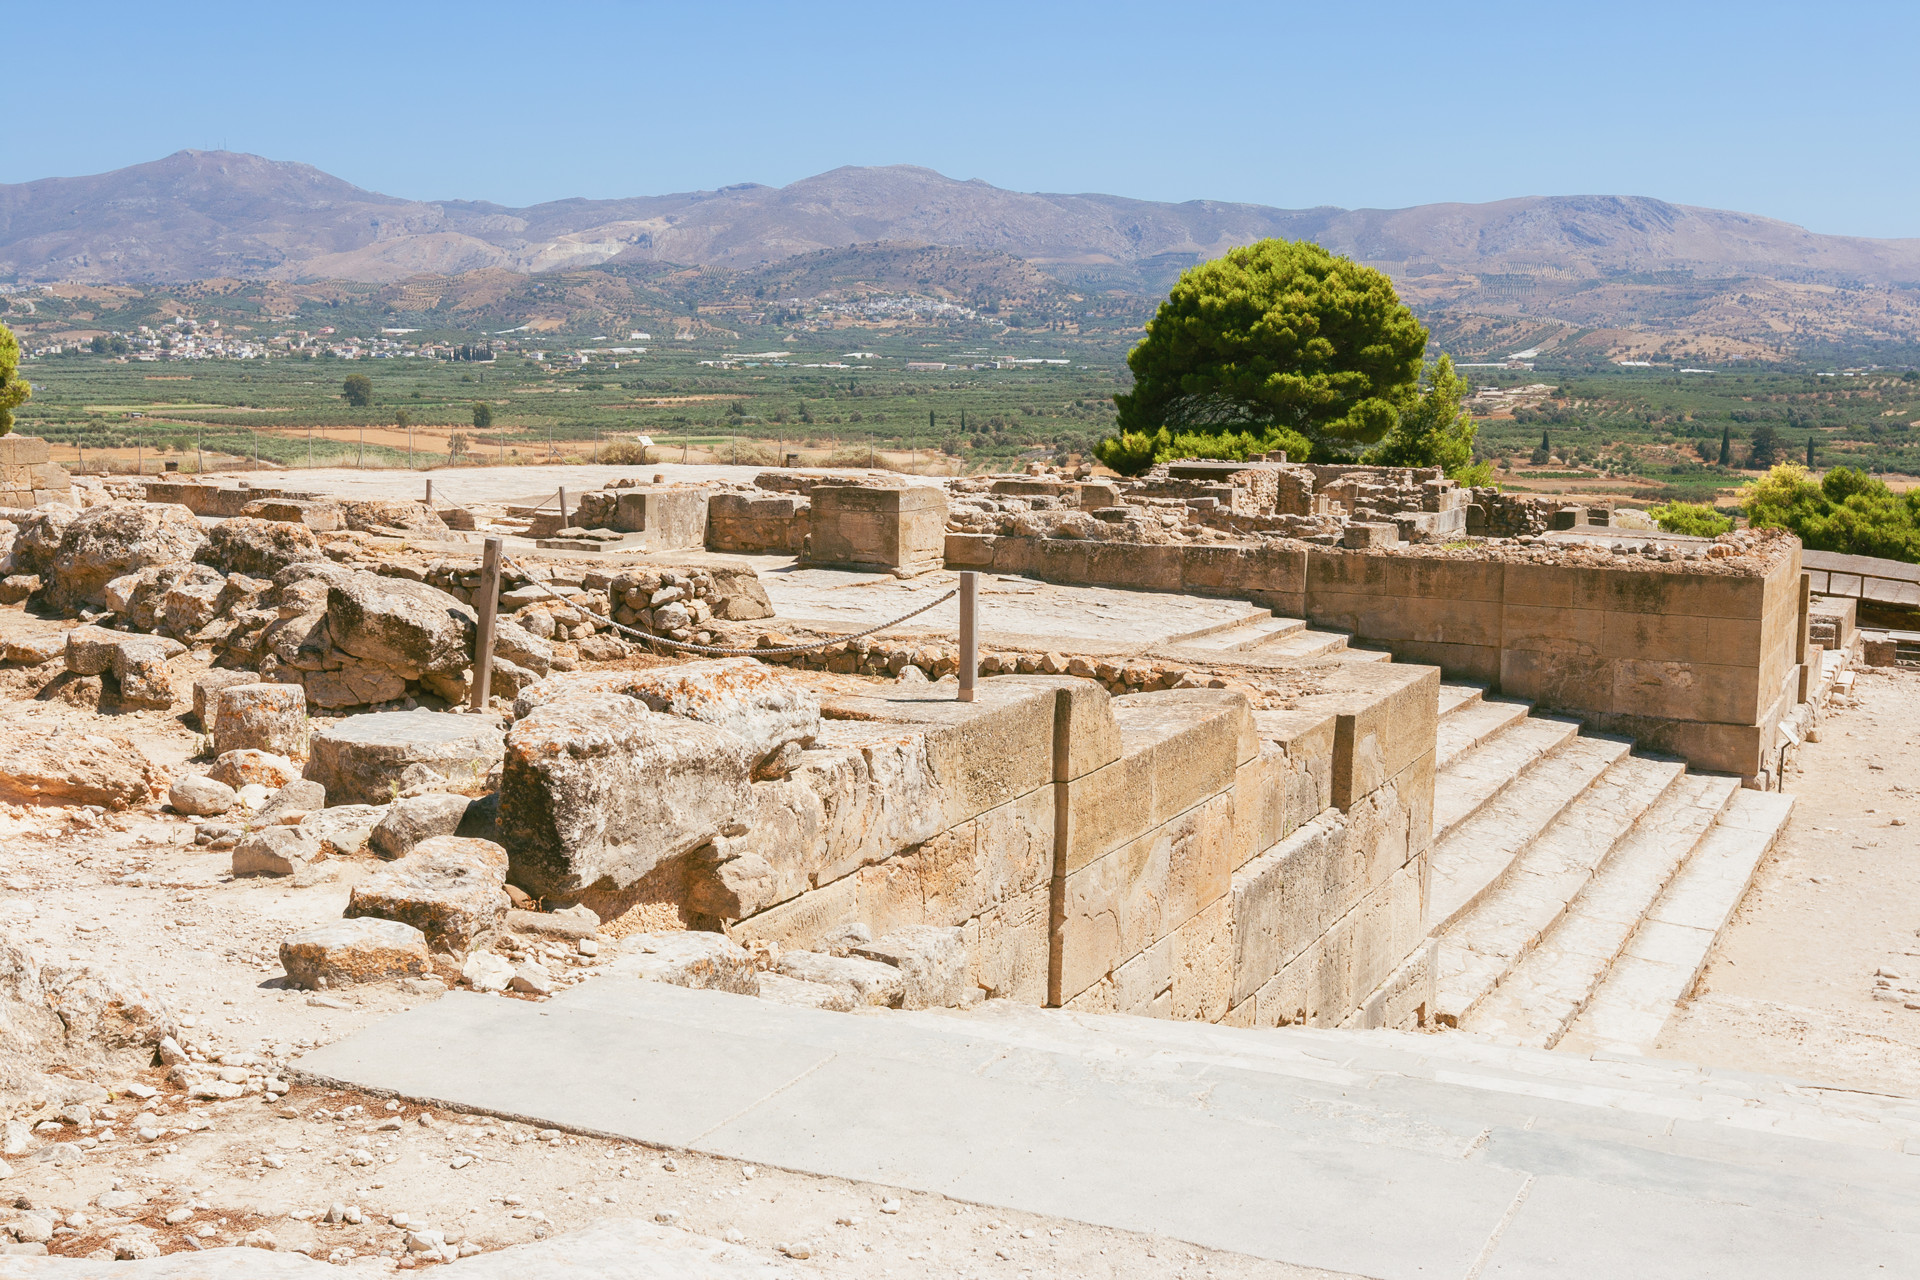 The Minoan Palace of Phaistos in Crete